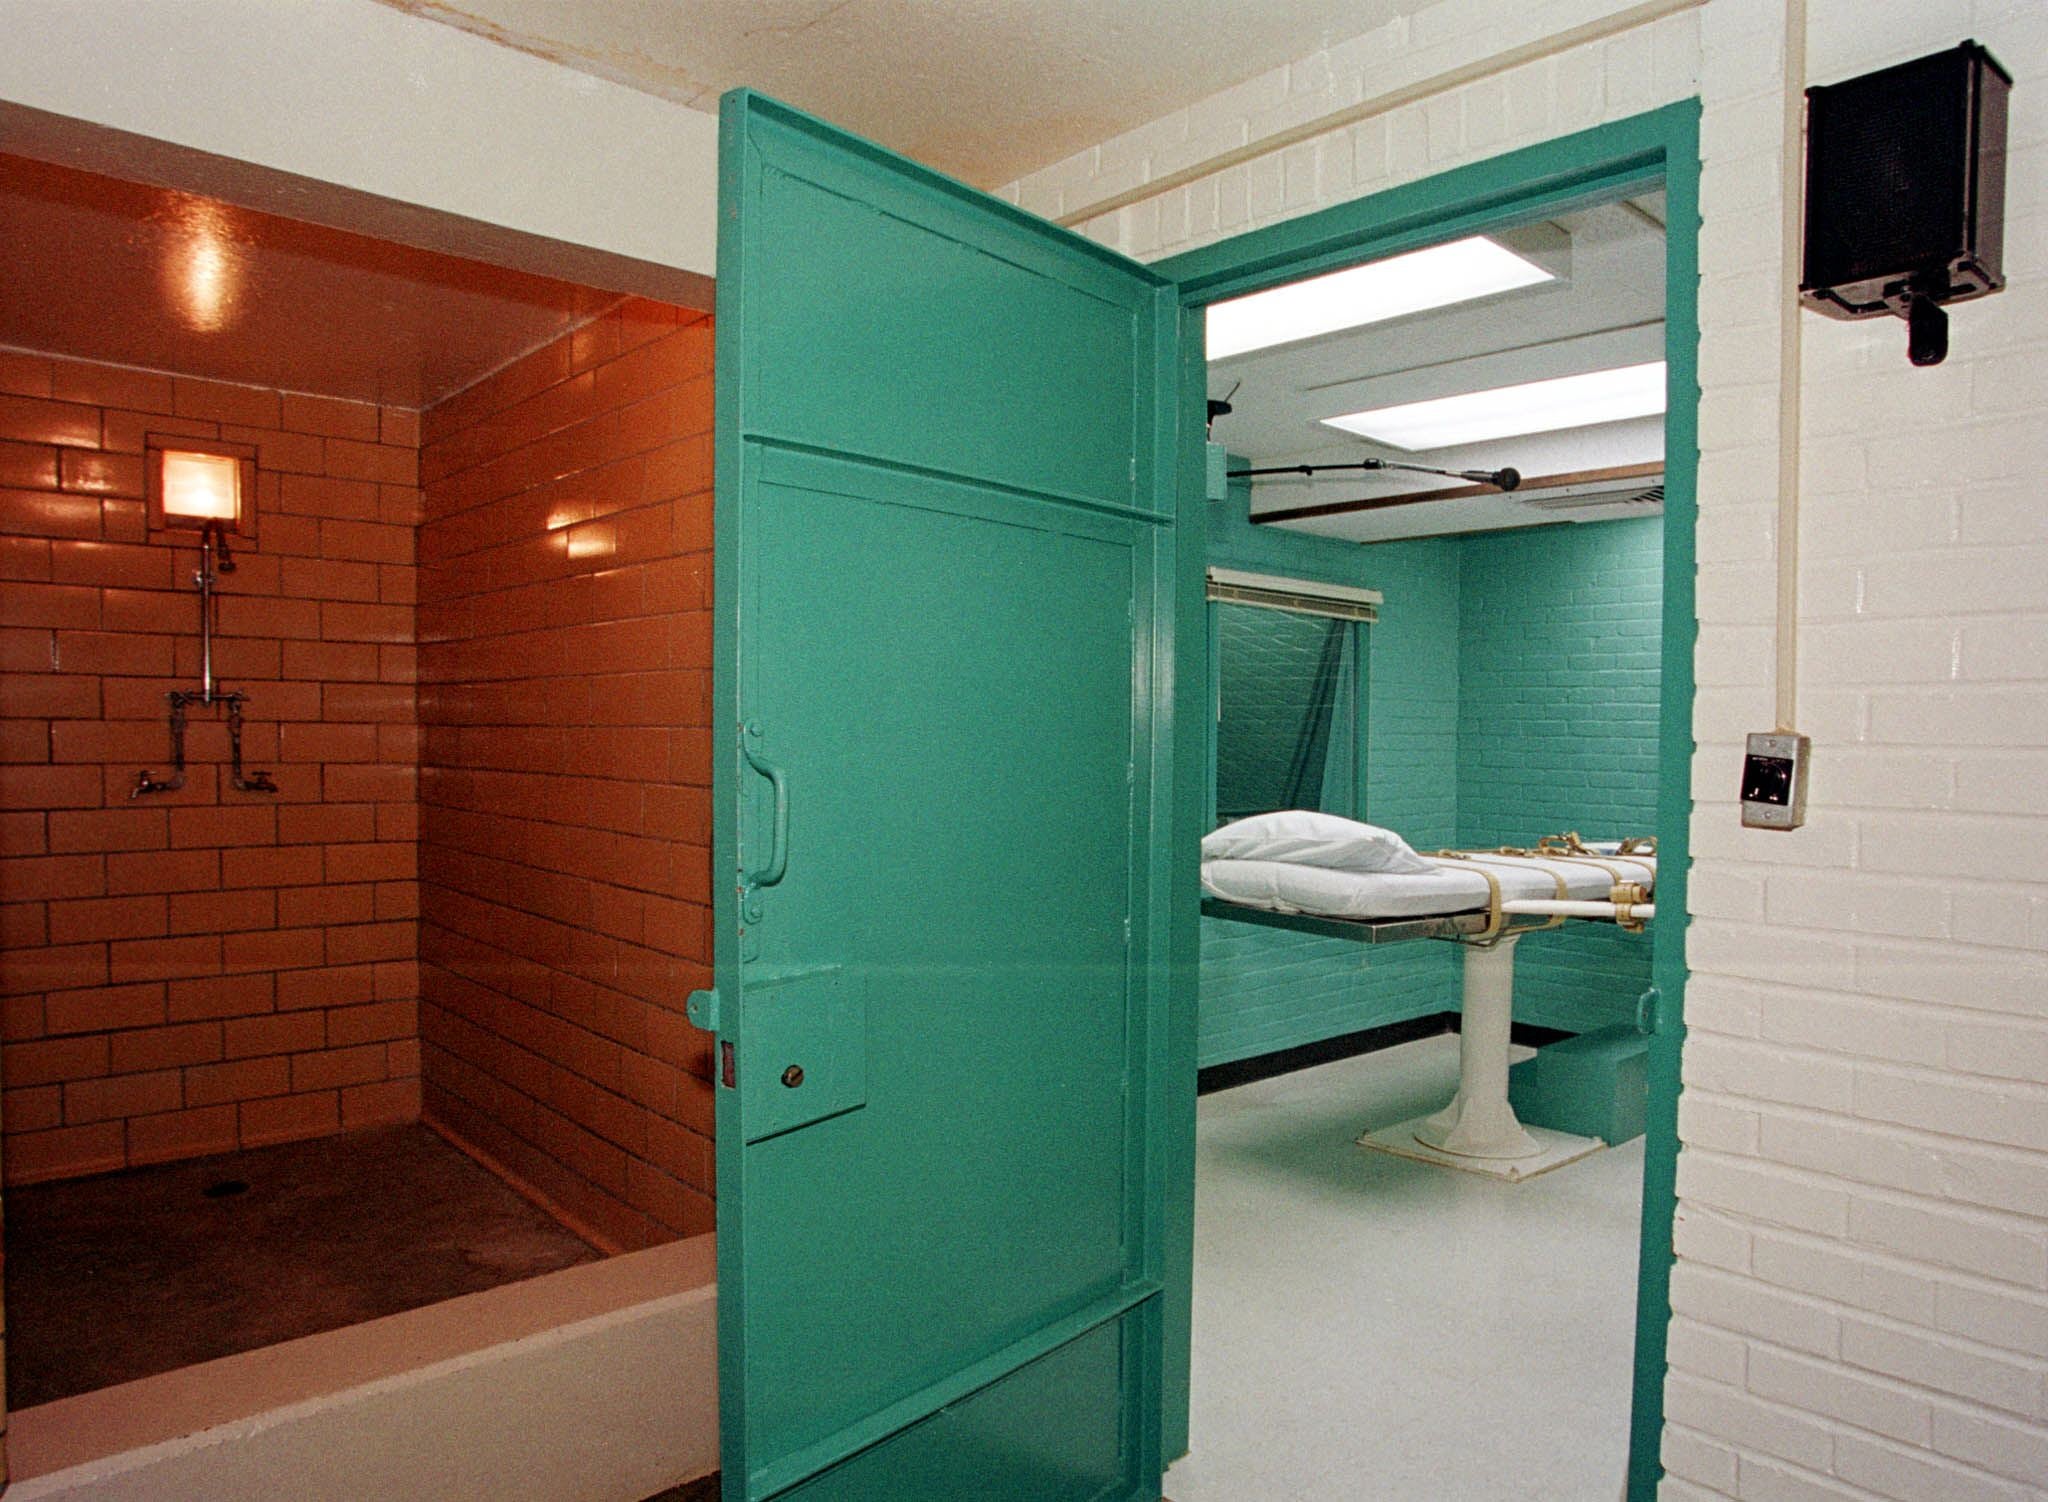 The entrance to a 'death chamber' at the Texas Department of Criminal Justice